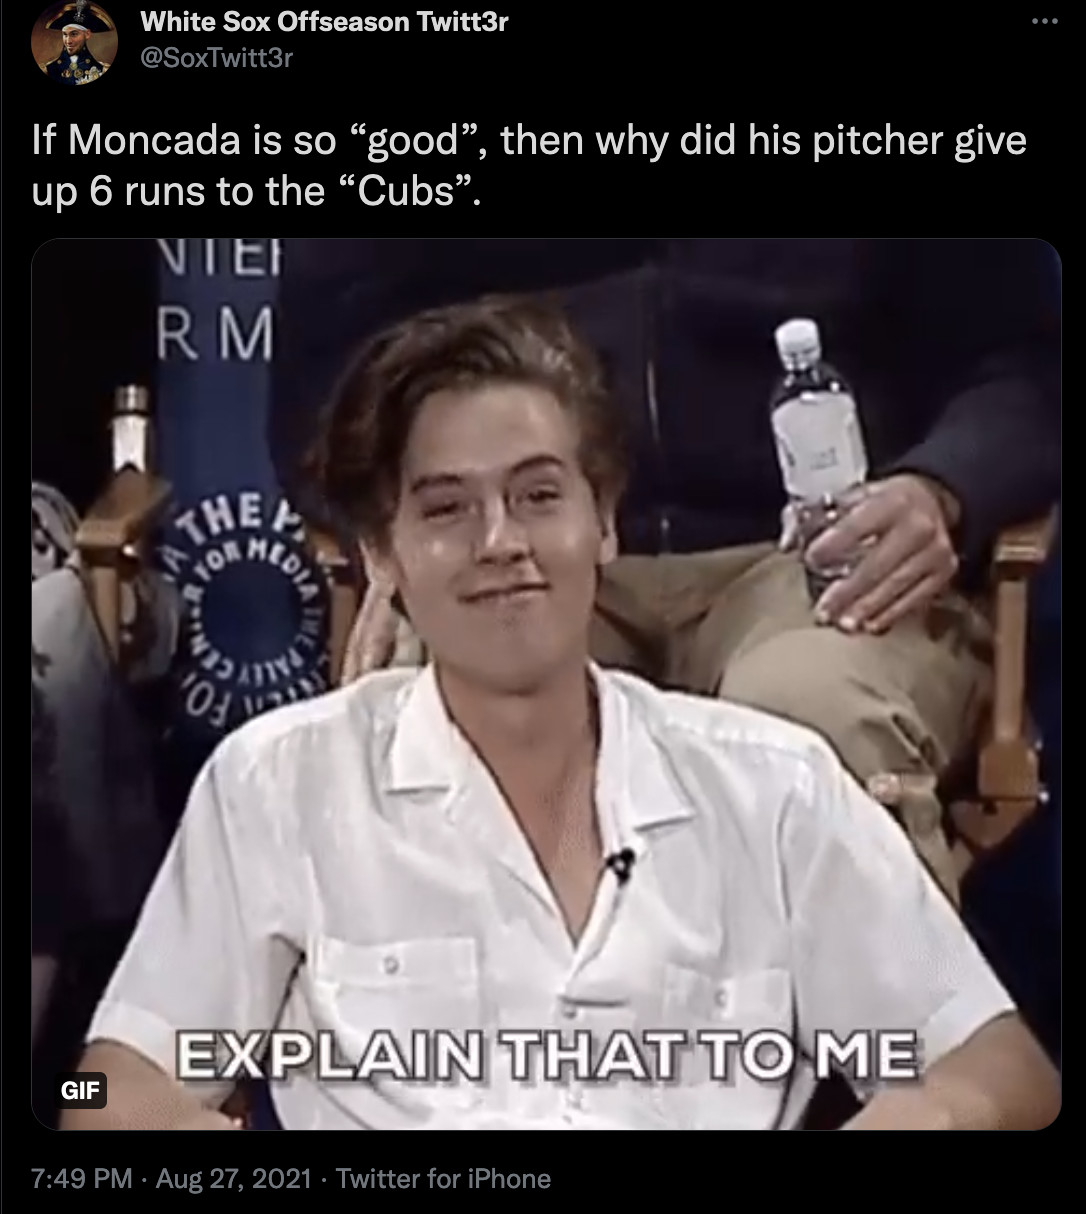 If Moncada is so “Good,” then why did his pitcher give up 6 runs to the “Cubs.”